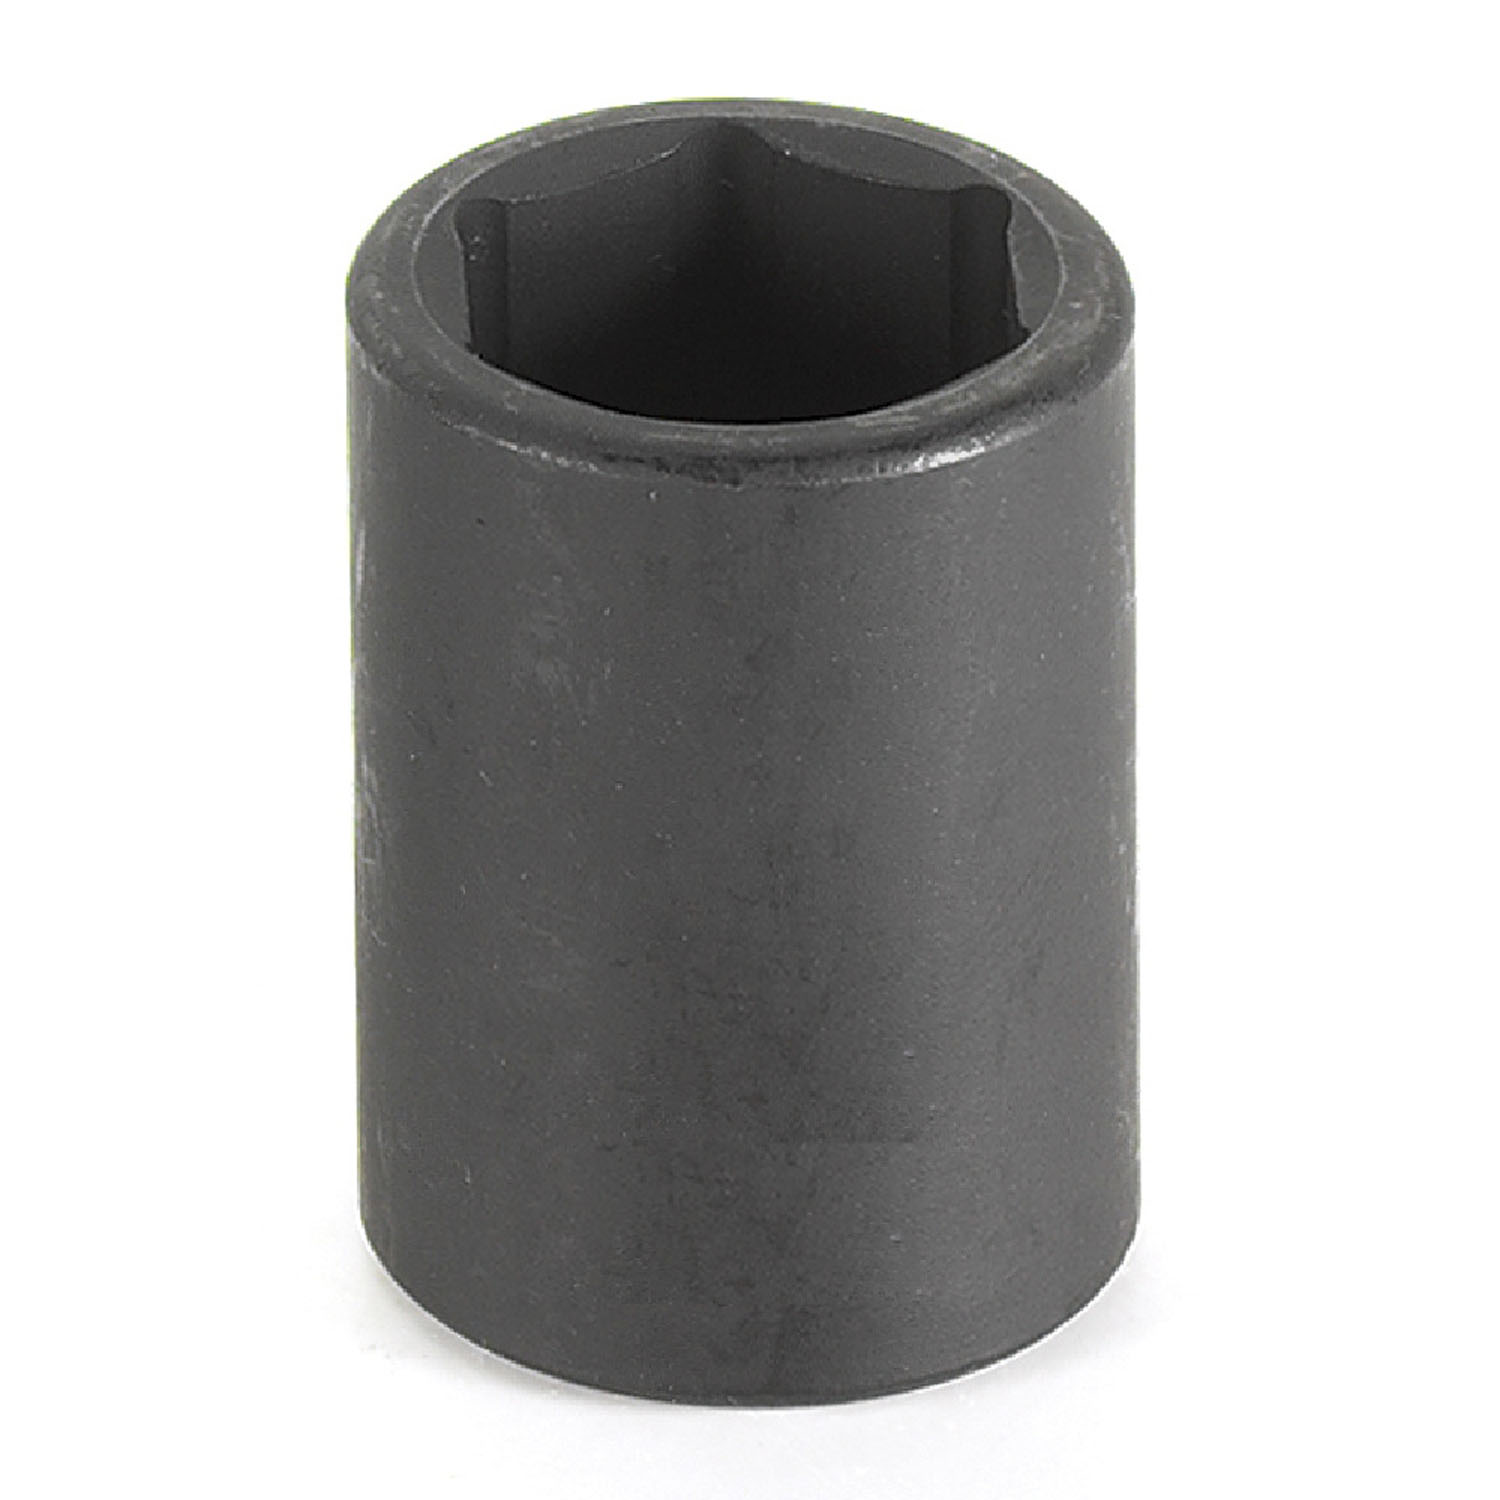 1/2 IN. DRIVE STANDARD LENGTH IMPACT 6 POINT METRIC SOCKETS (MULTIPLE SIZES AVAILABLE)